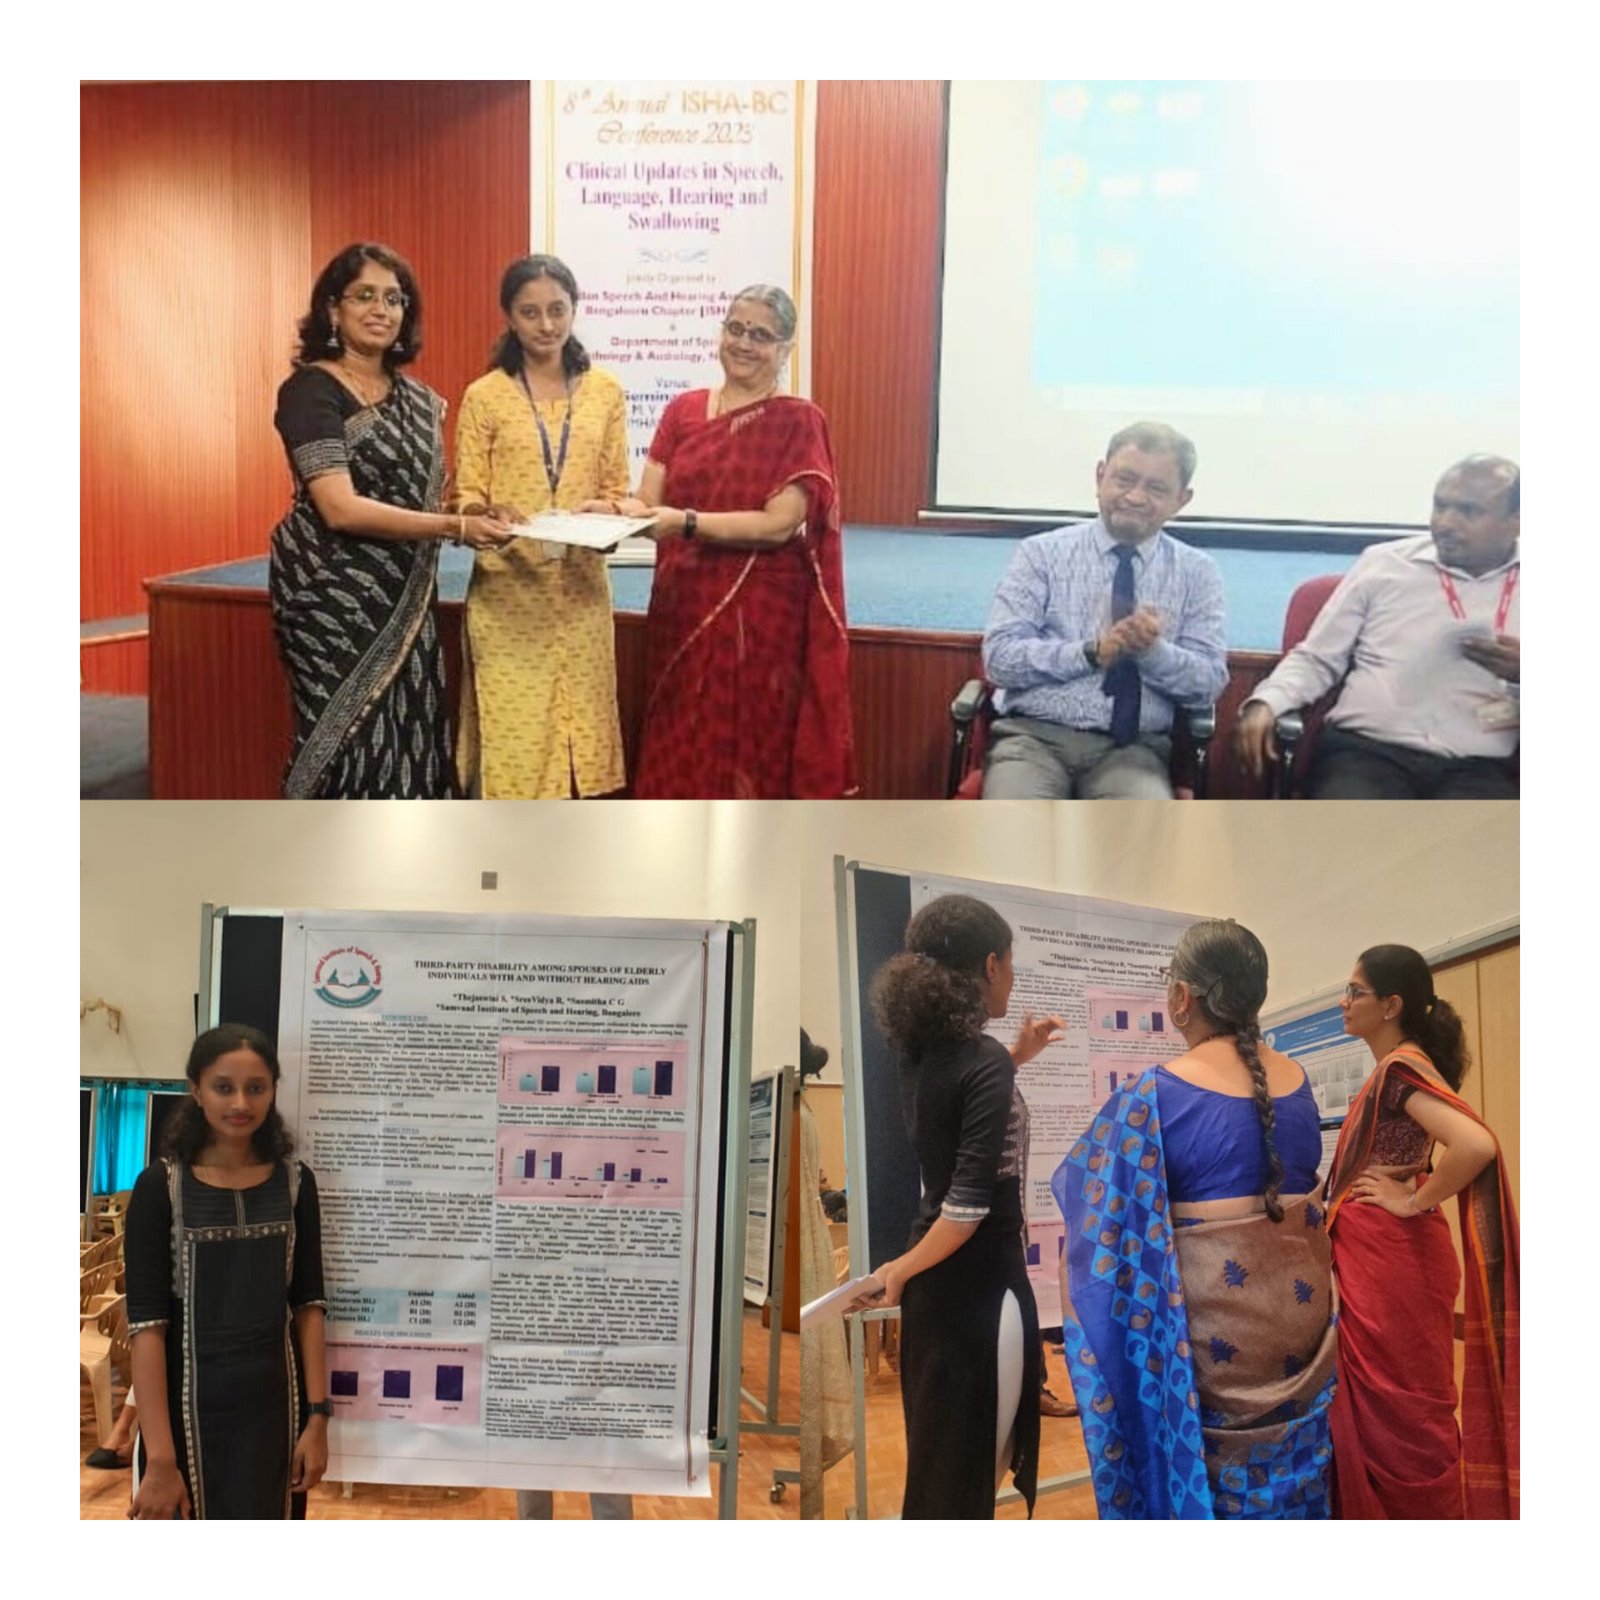 You are currently viewing Best poster award at ISHA BC conference, held at Dr M.V Govind Swamy Hall,NIMHANS on 18th and 19th November 2023 to our student Ms. Tejaswini and faculty members Mrs. Sreevidya and Mrs. Susmitha C G.